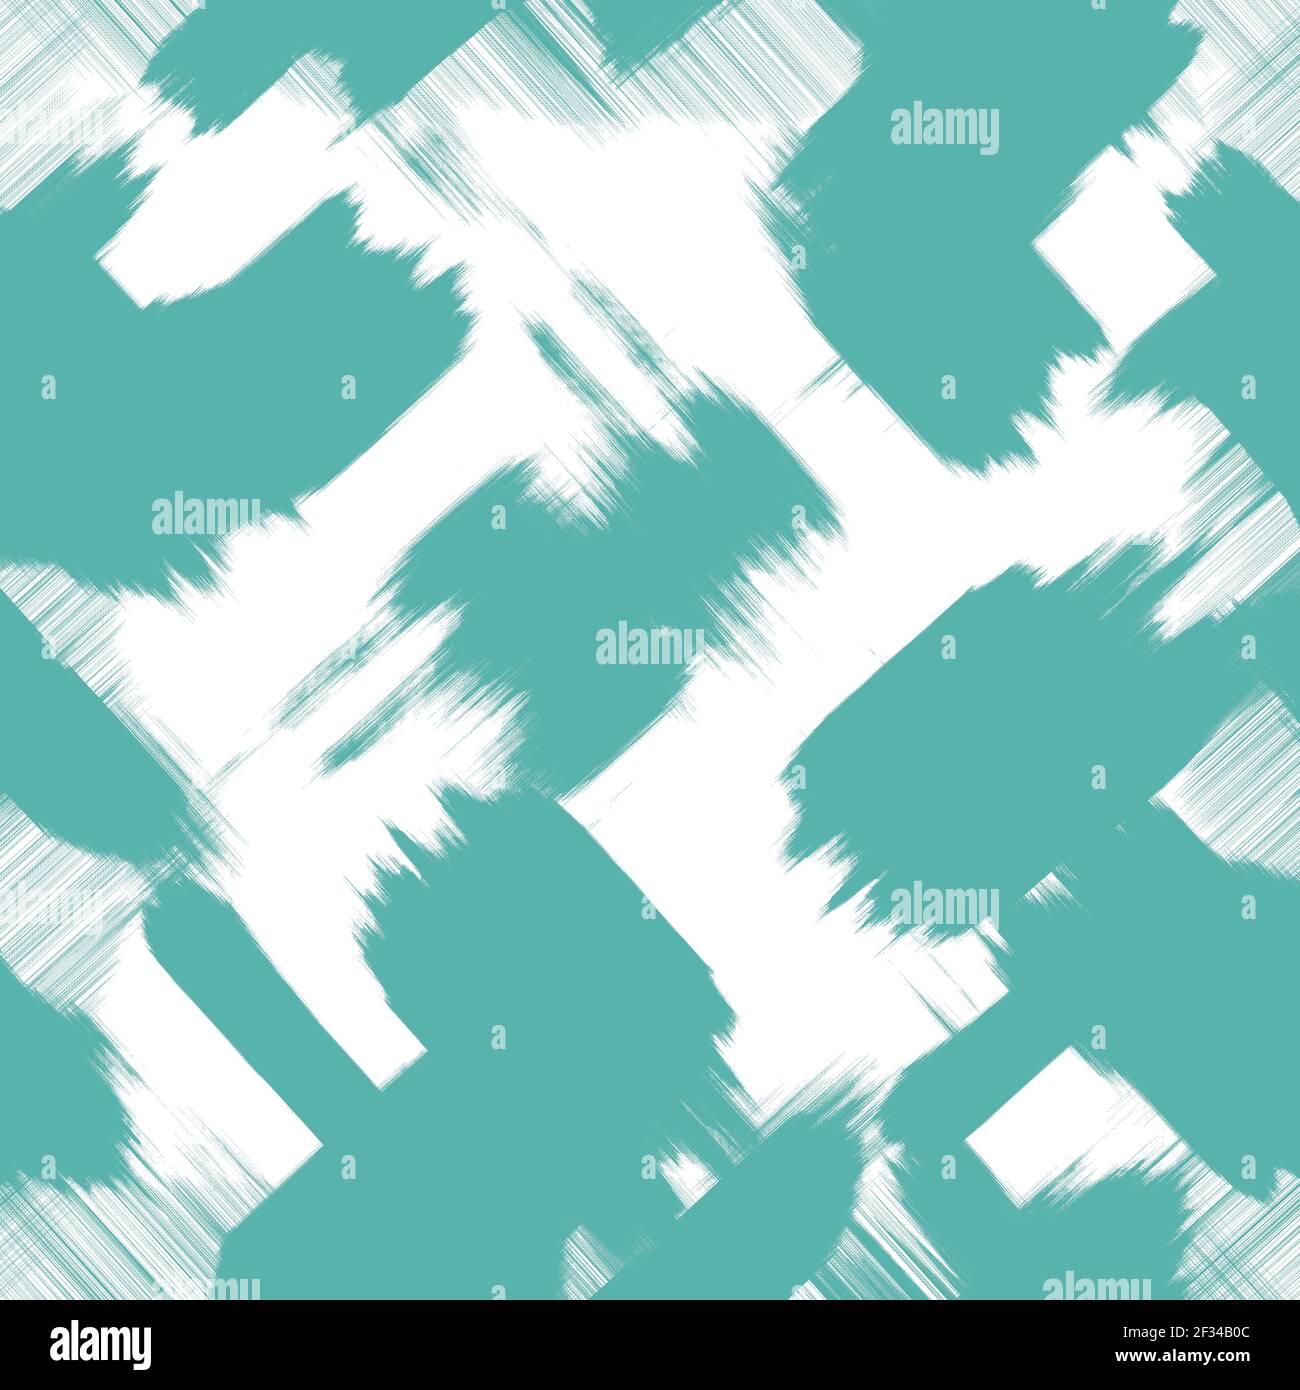 Teal brush strokes, white background. Colored grunge wallpaper. Abstract pattern of chaotic shapes, digital painting imitation. Stylish modern design Stock Photo